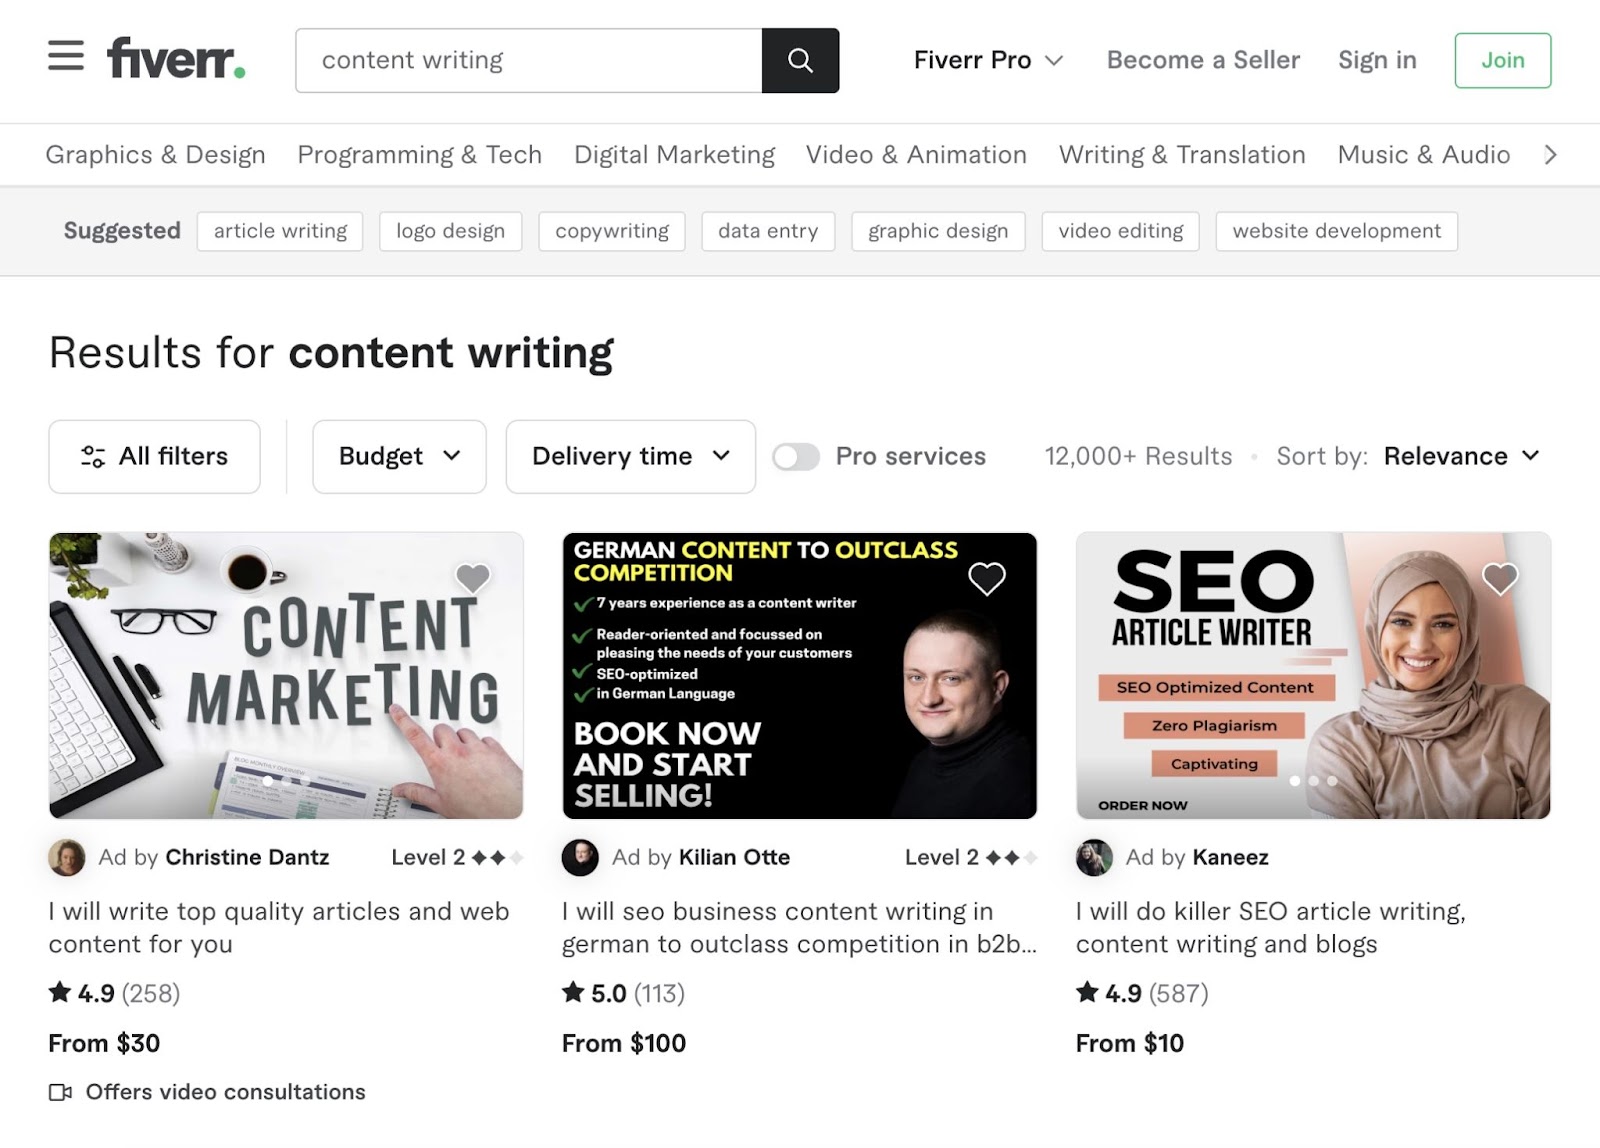 Results for content writing on Fiverr's website